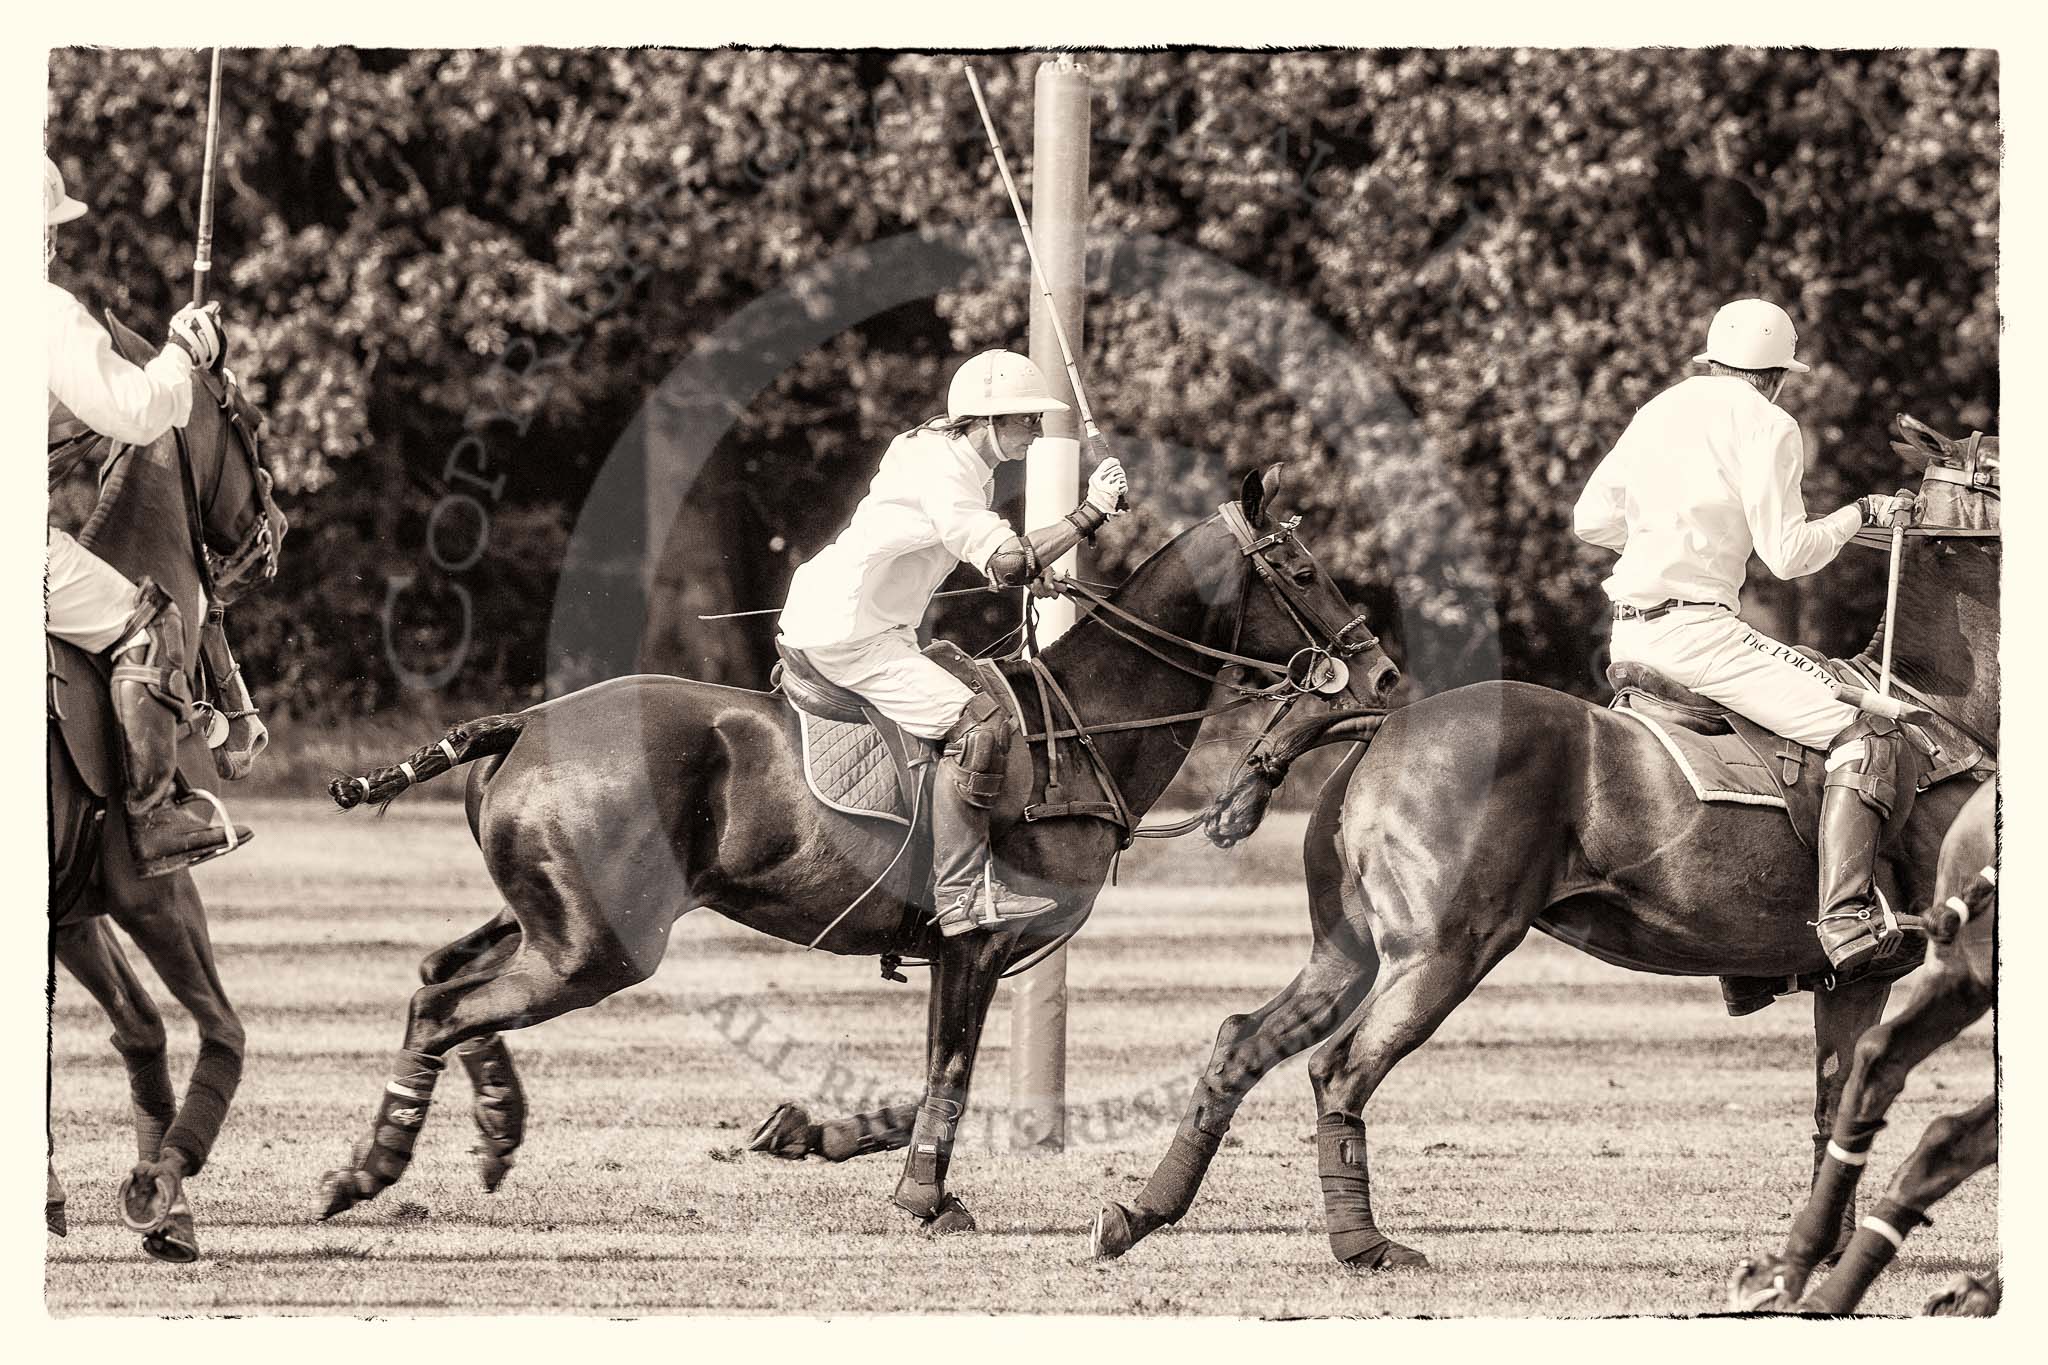 7th Heritage Polo Cup semi-finals: La Golondrina Argentina Pepe Riglos (6)..
Hurtwood Park Polo Club,
Ewhurst Green,
Surrey,
United Kingdom,
on 04 August 2012 at 16:49, image #329